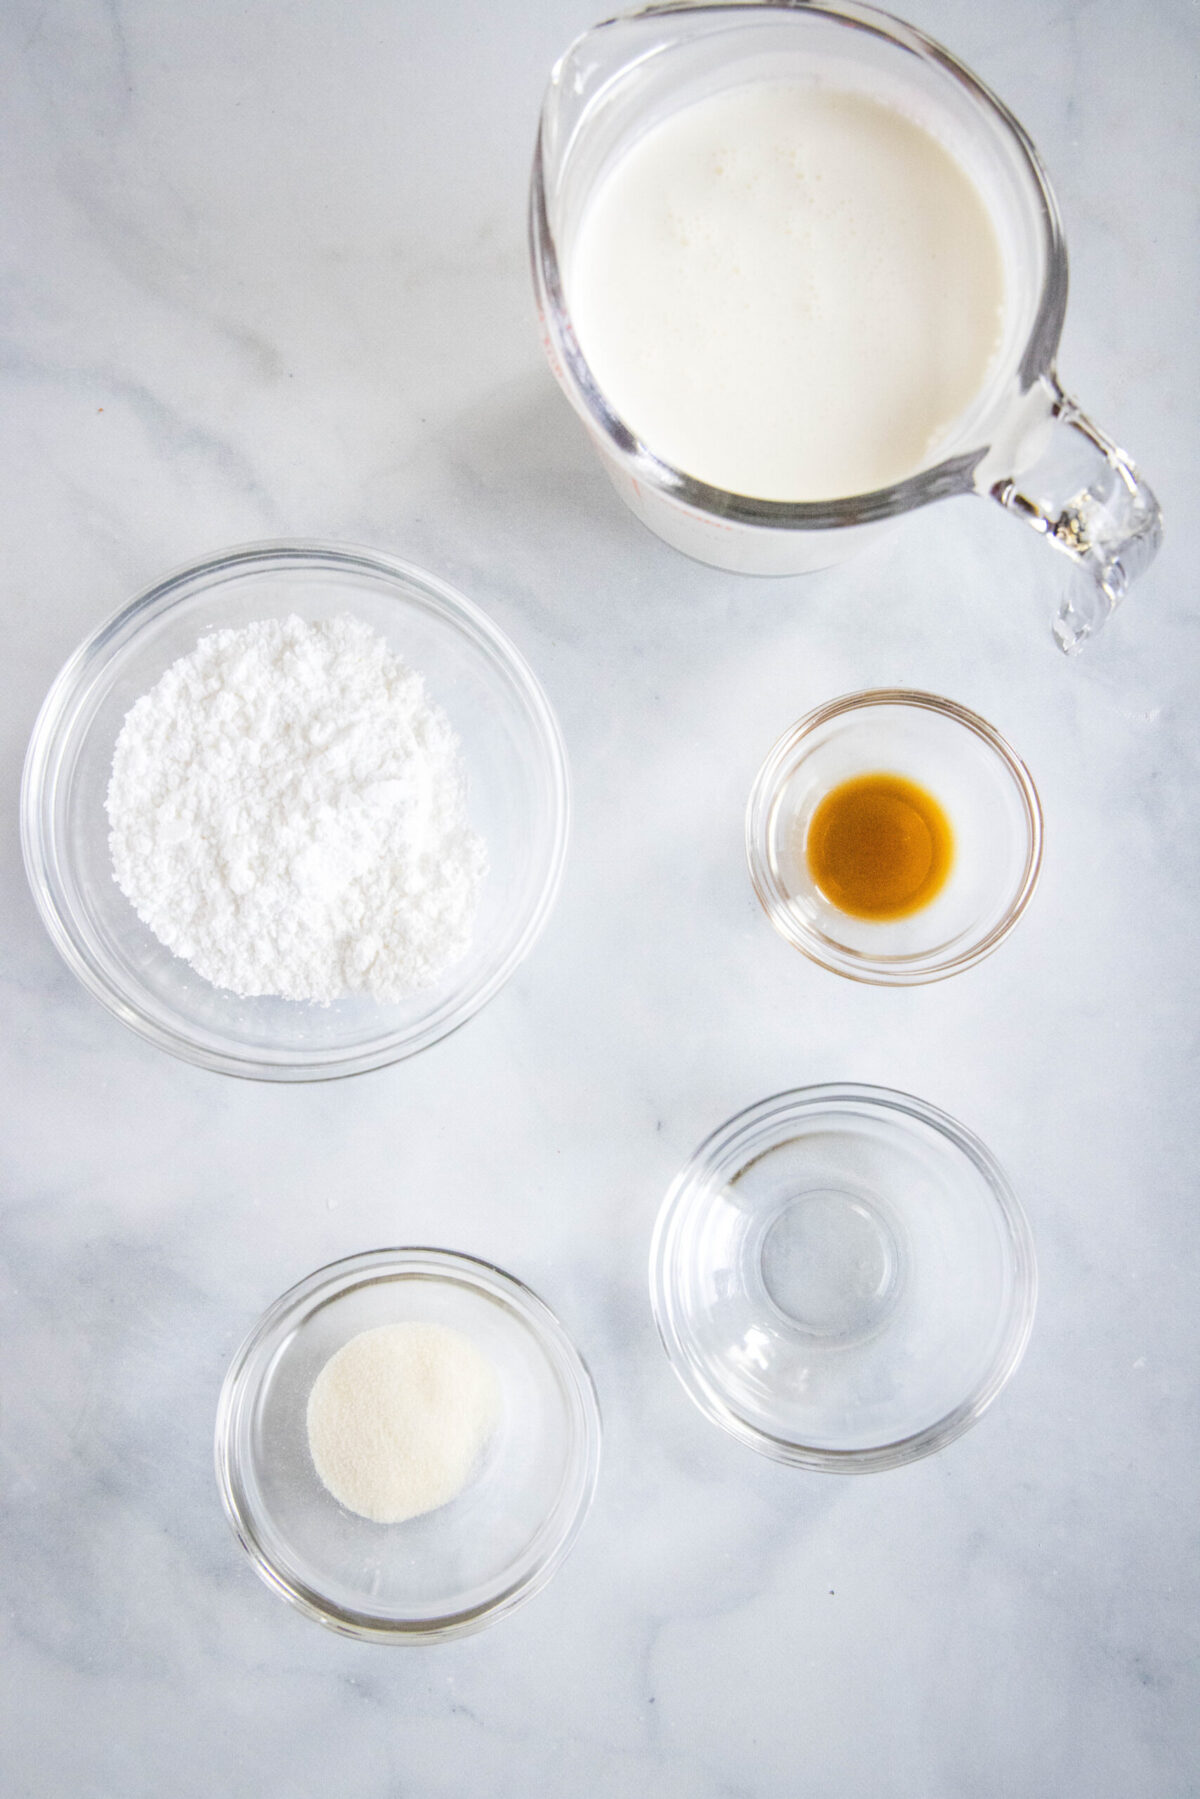 Overhead view of the ingredients needed for stabilized whipped cream: a pyrex of whipping cream, a bowl of powdered sugar, a bowl of vanilla extract, a bowl of gelatin powder, and a bowl of water